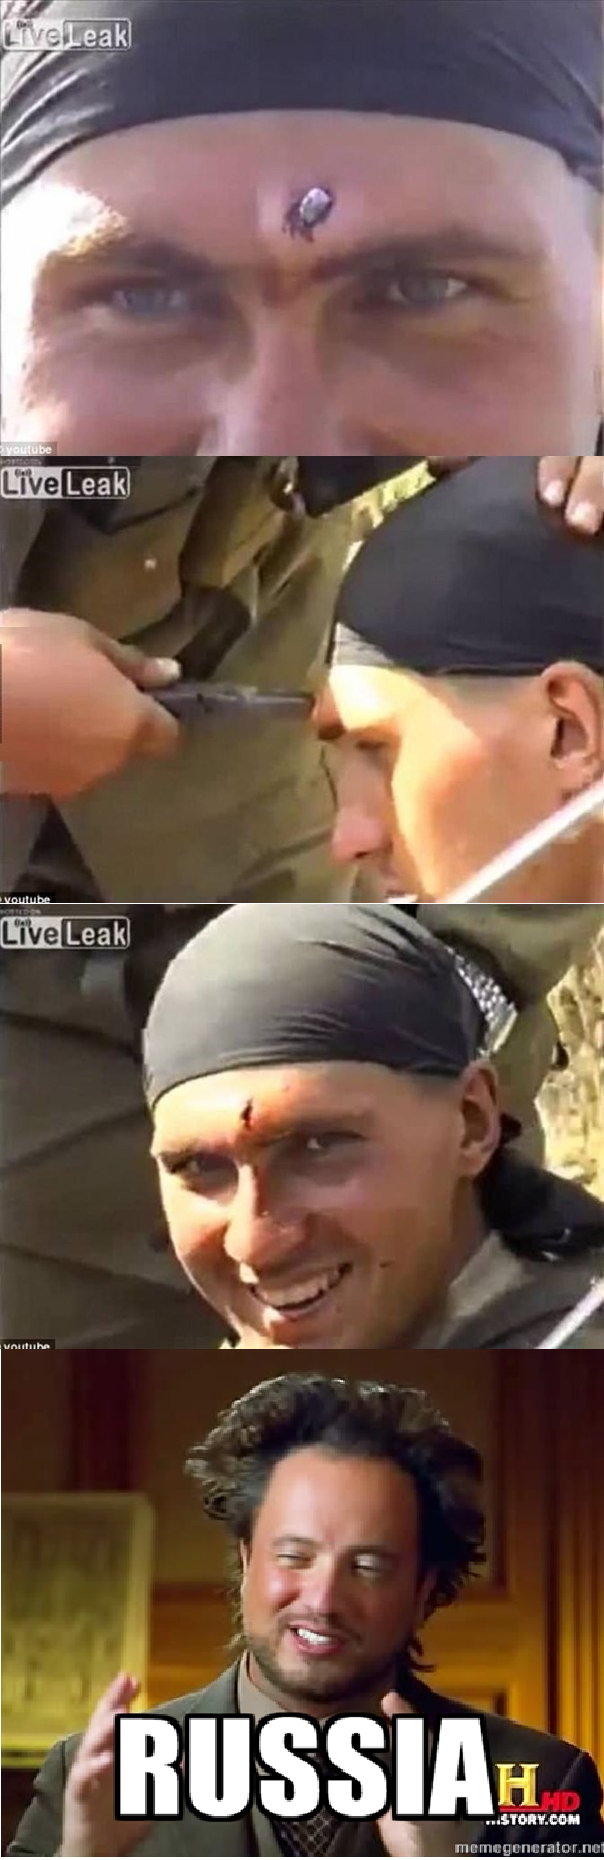 Russian Soldier Catches Bullet with Forehead - link in comments